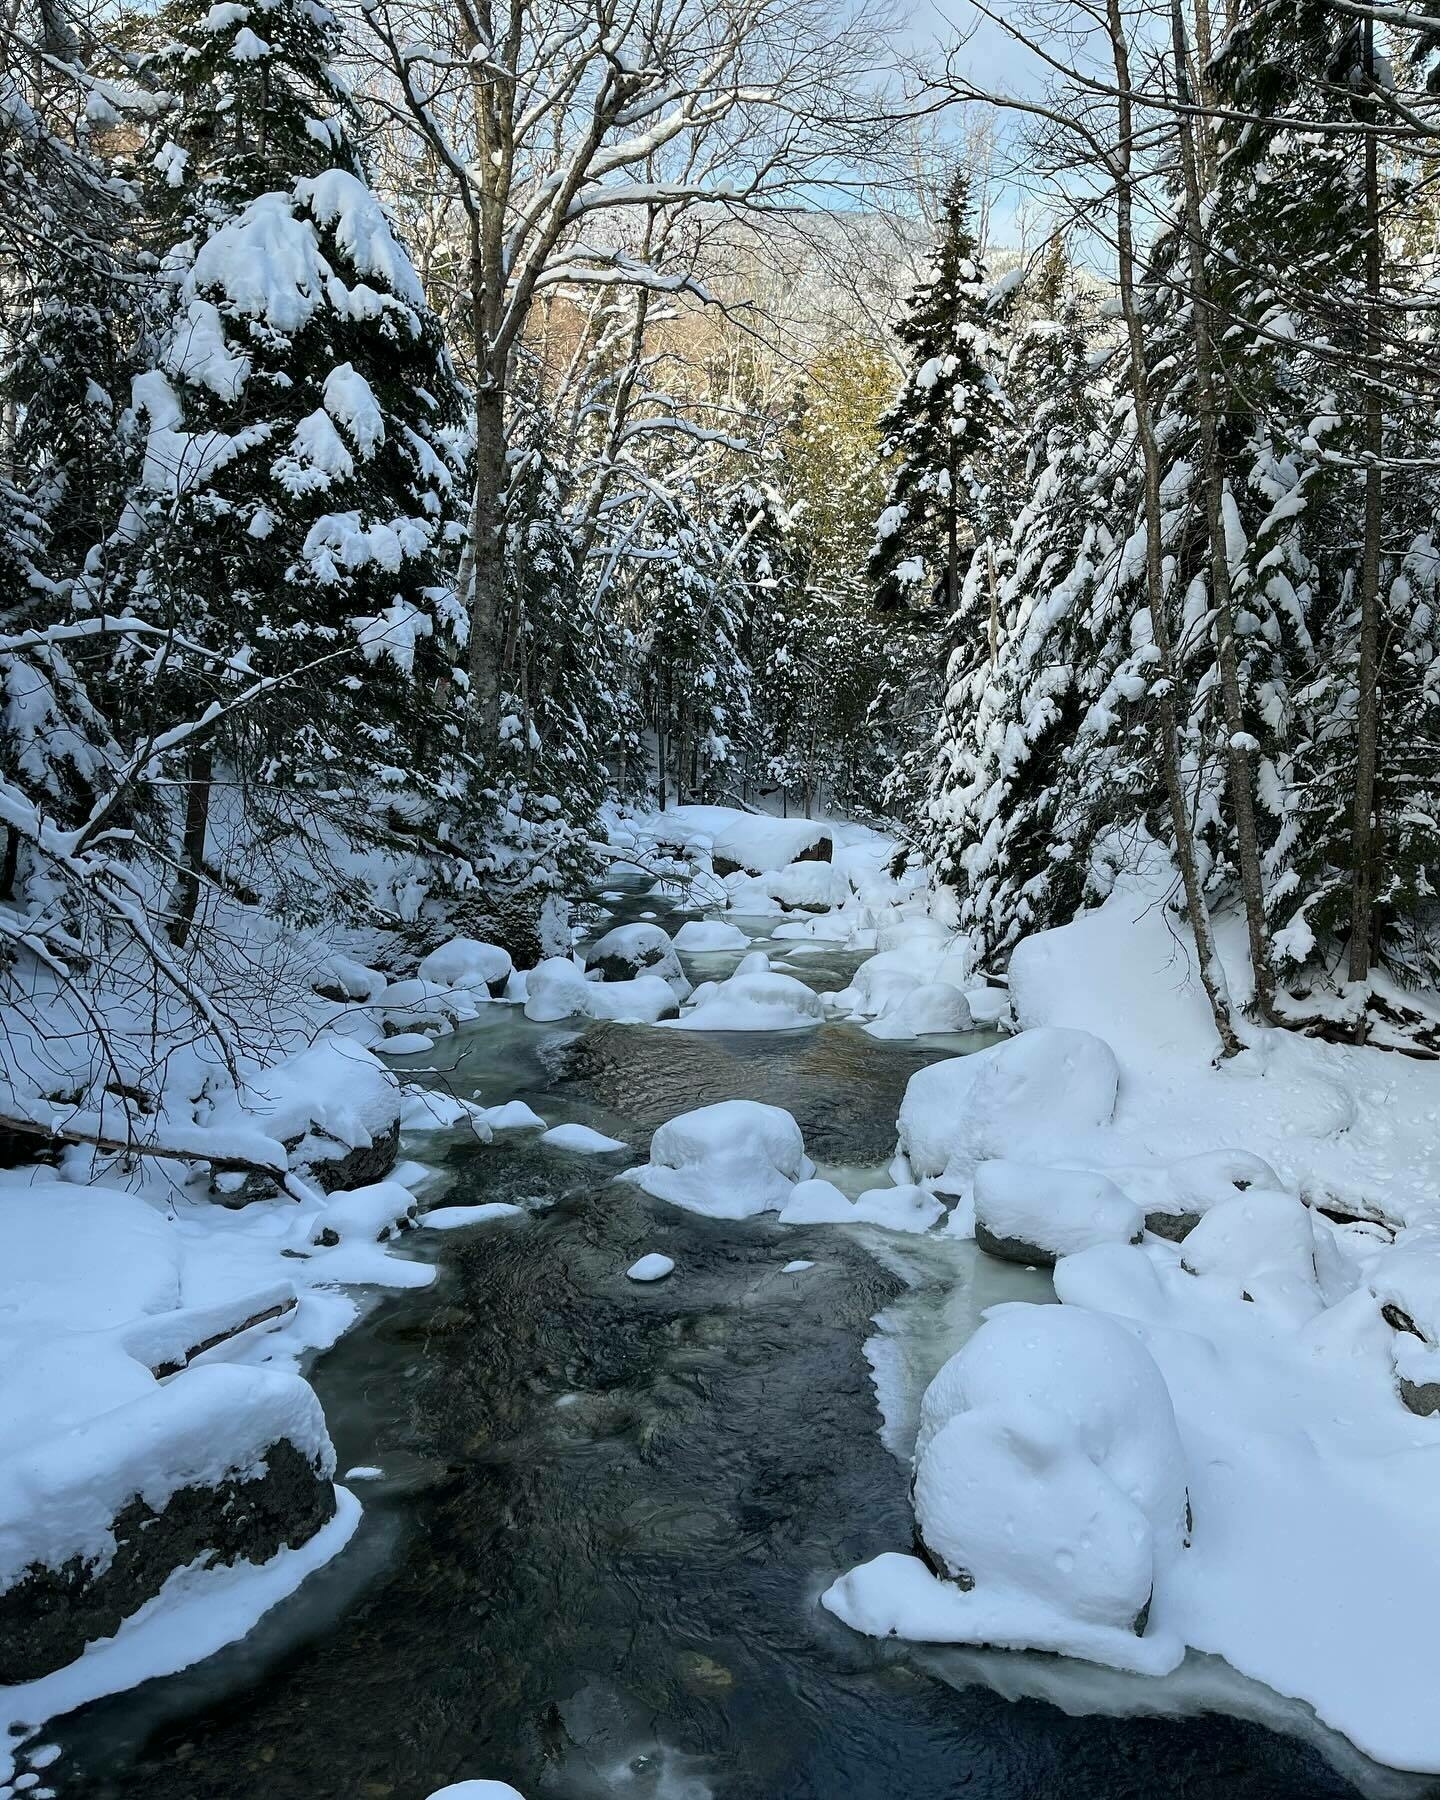 A snow-covered stream meanders through a dense, snowy forest under a clear sky.